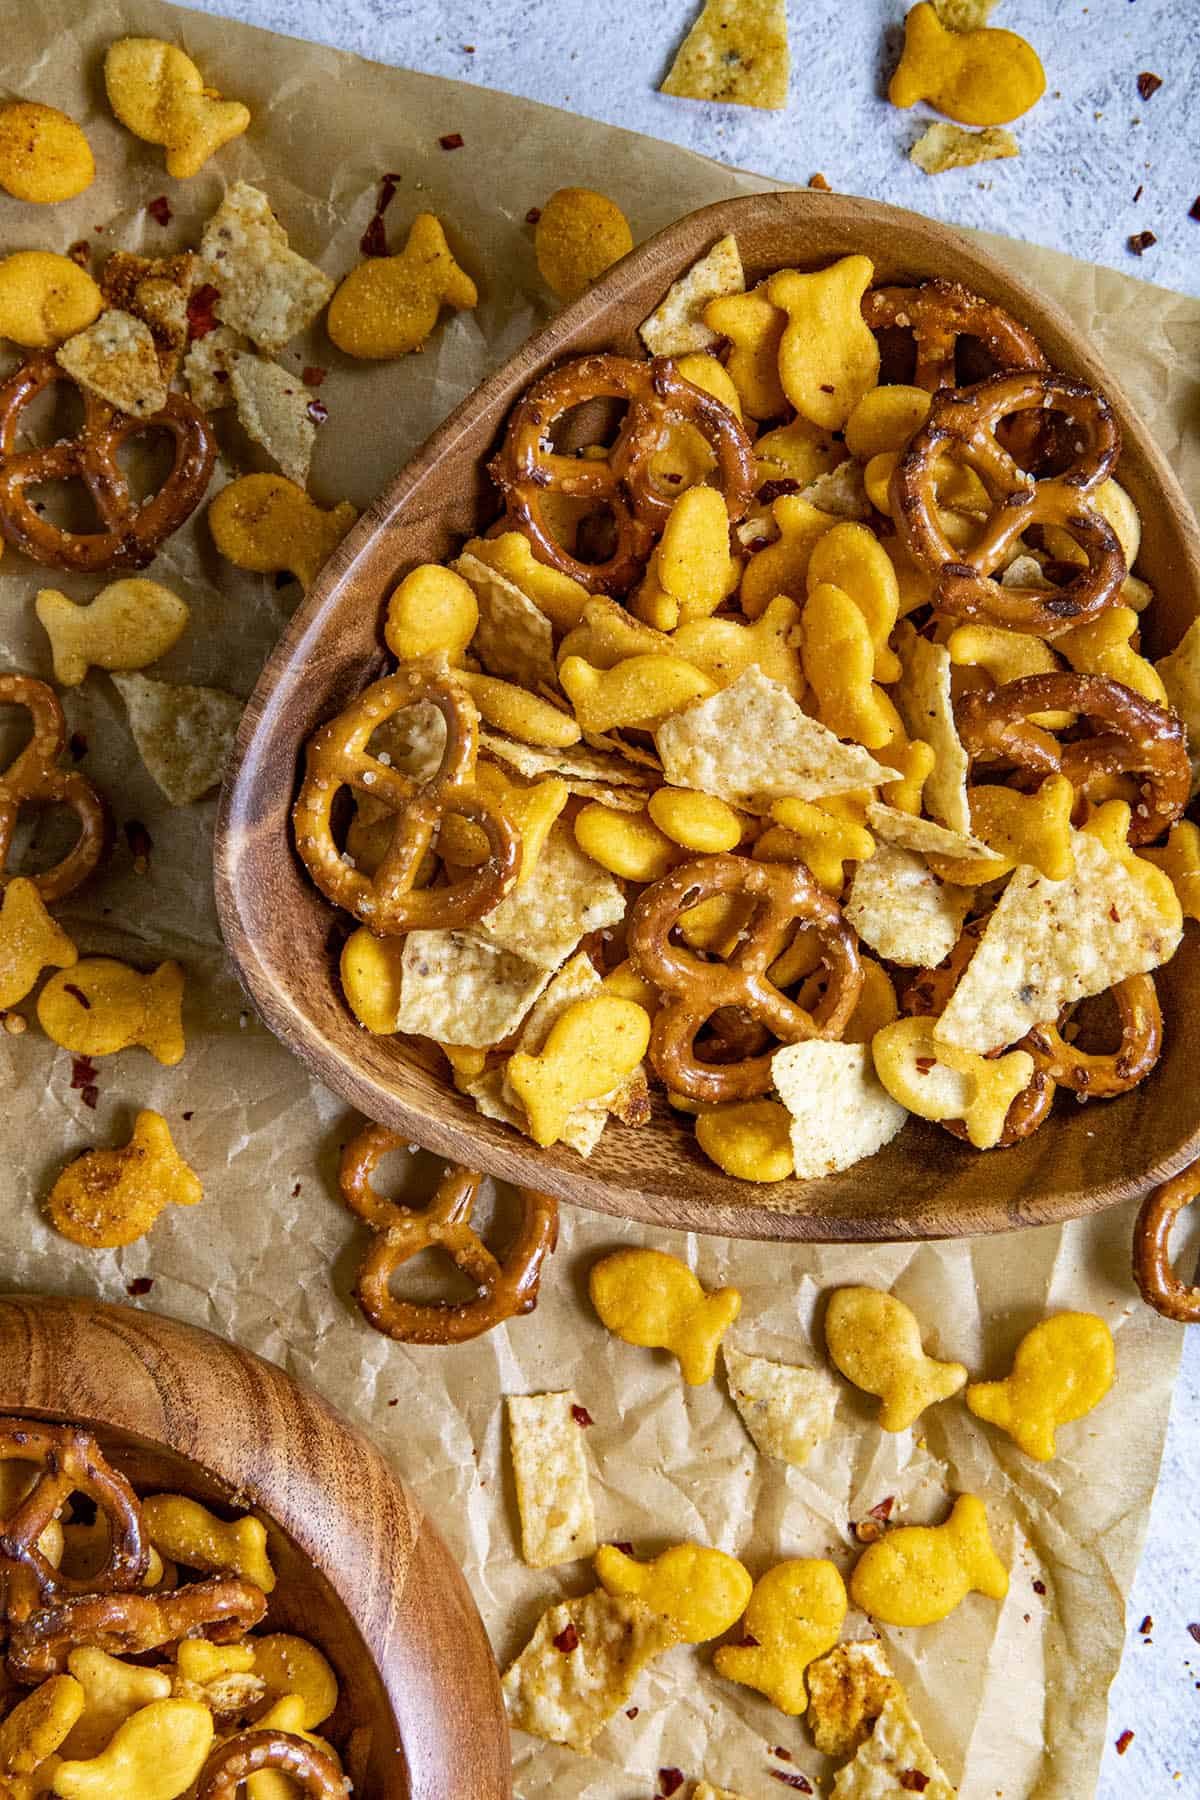 Lots of crunchy Spicy Snack Mix.